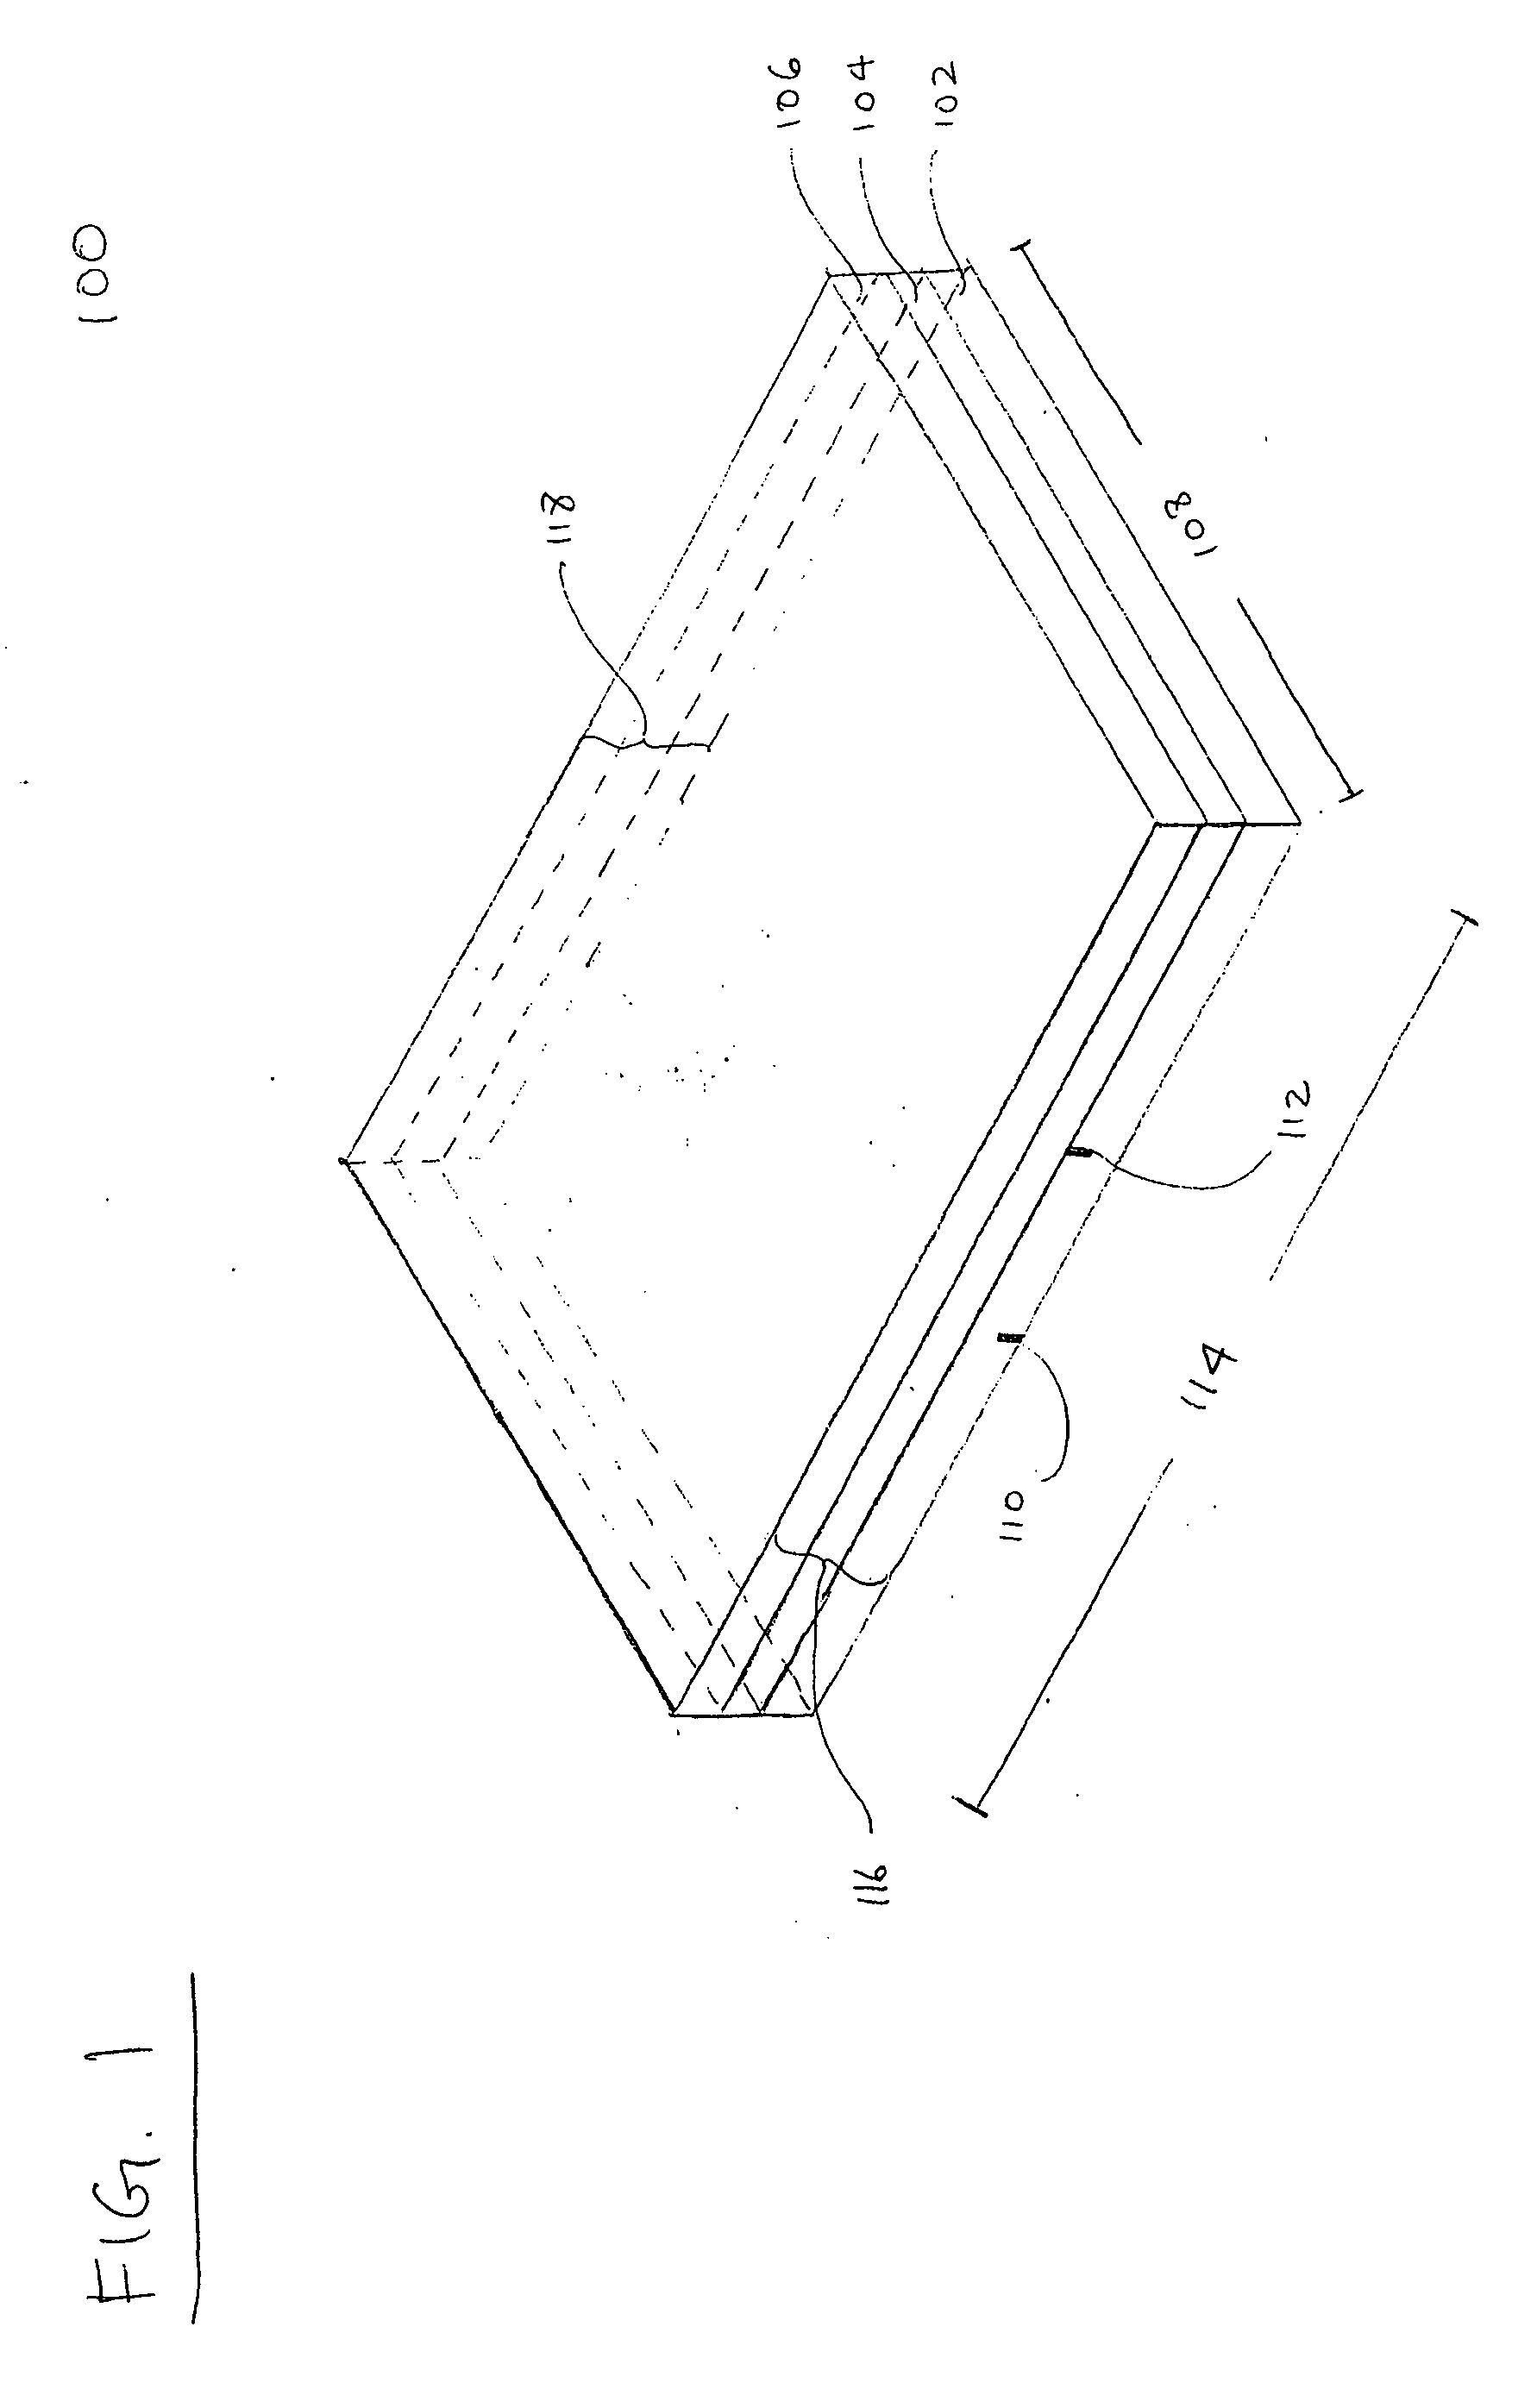 Systems and methods for hinged bedding assemblies